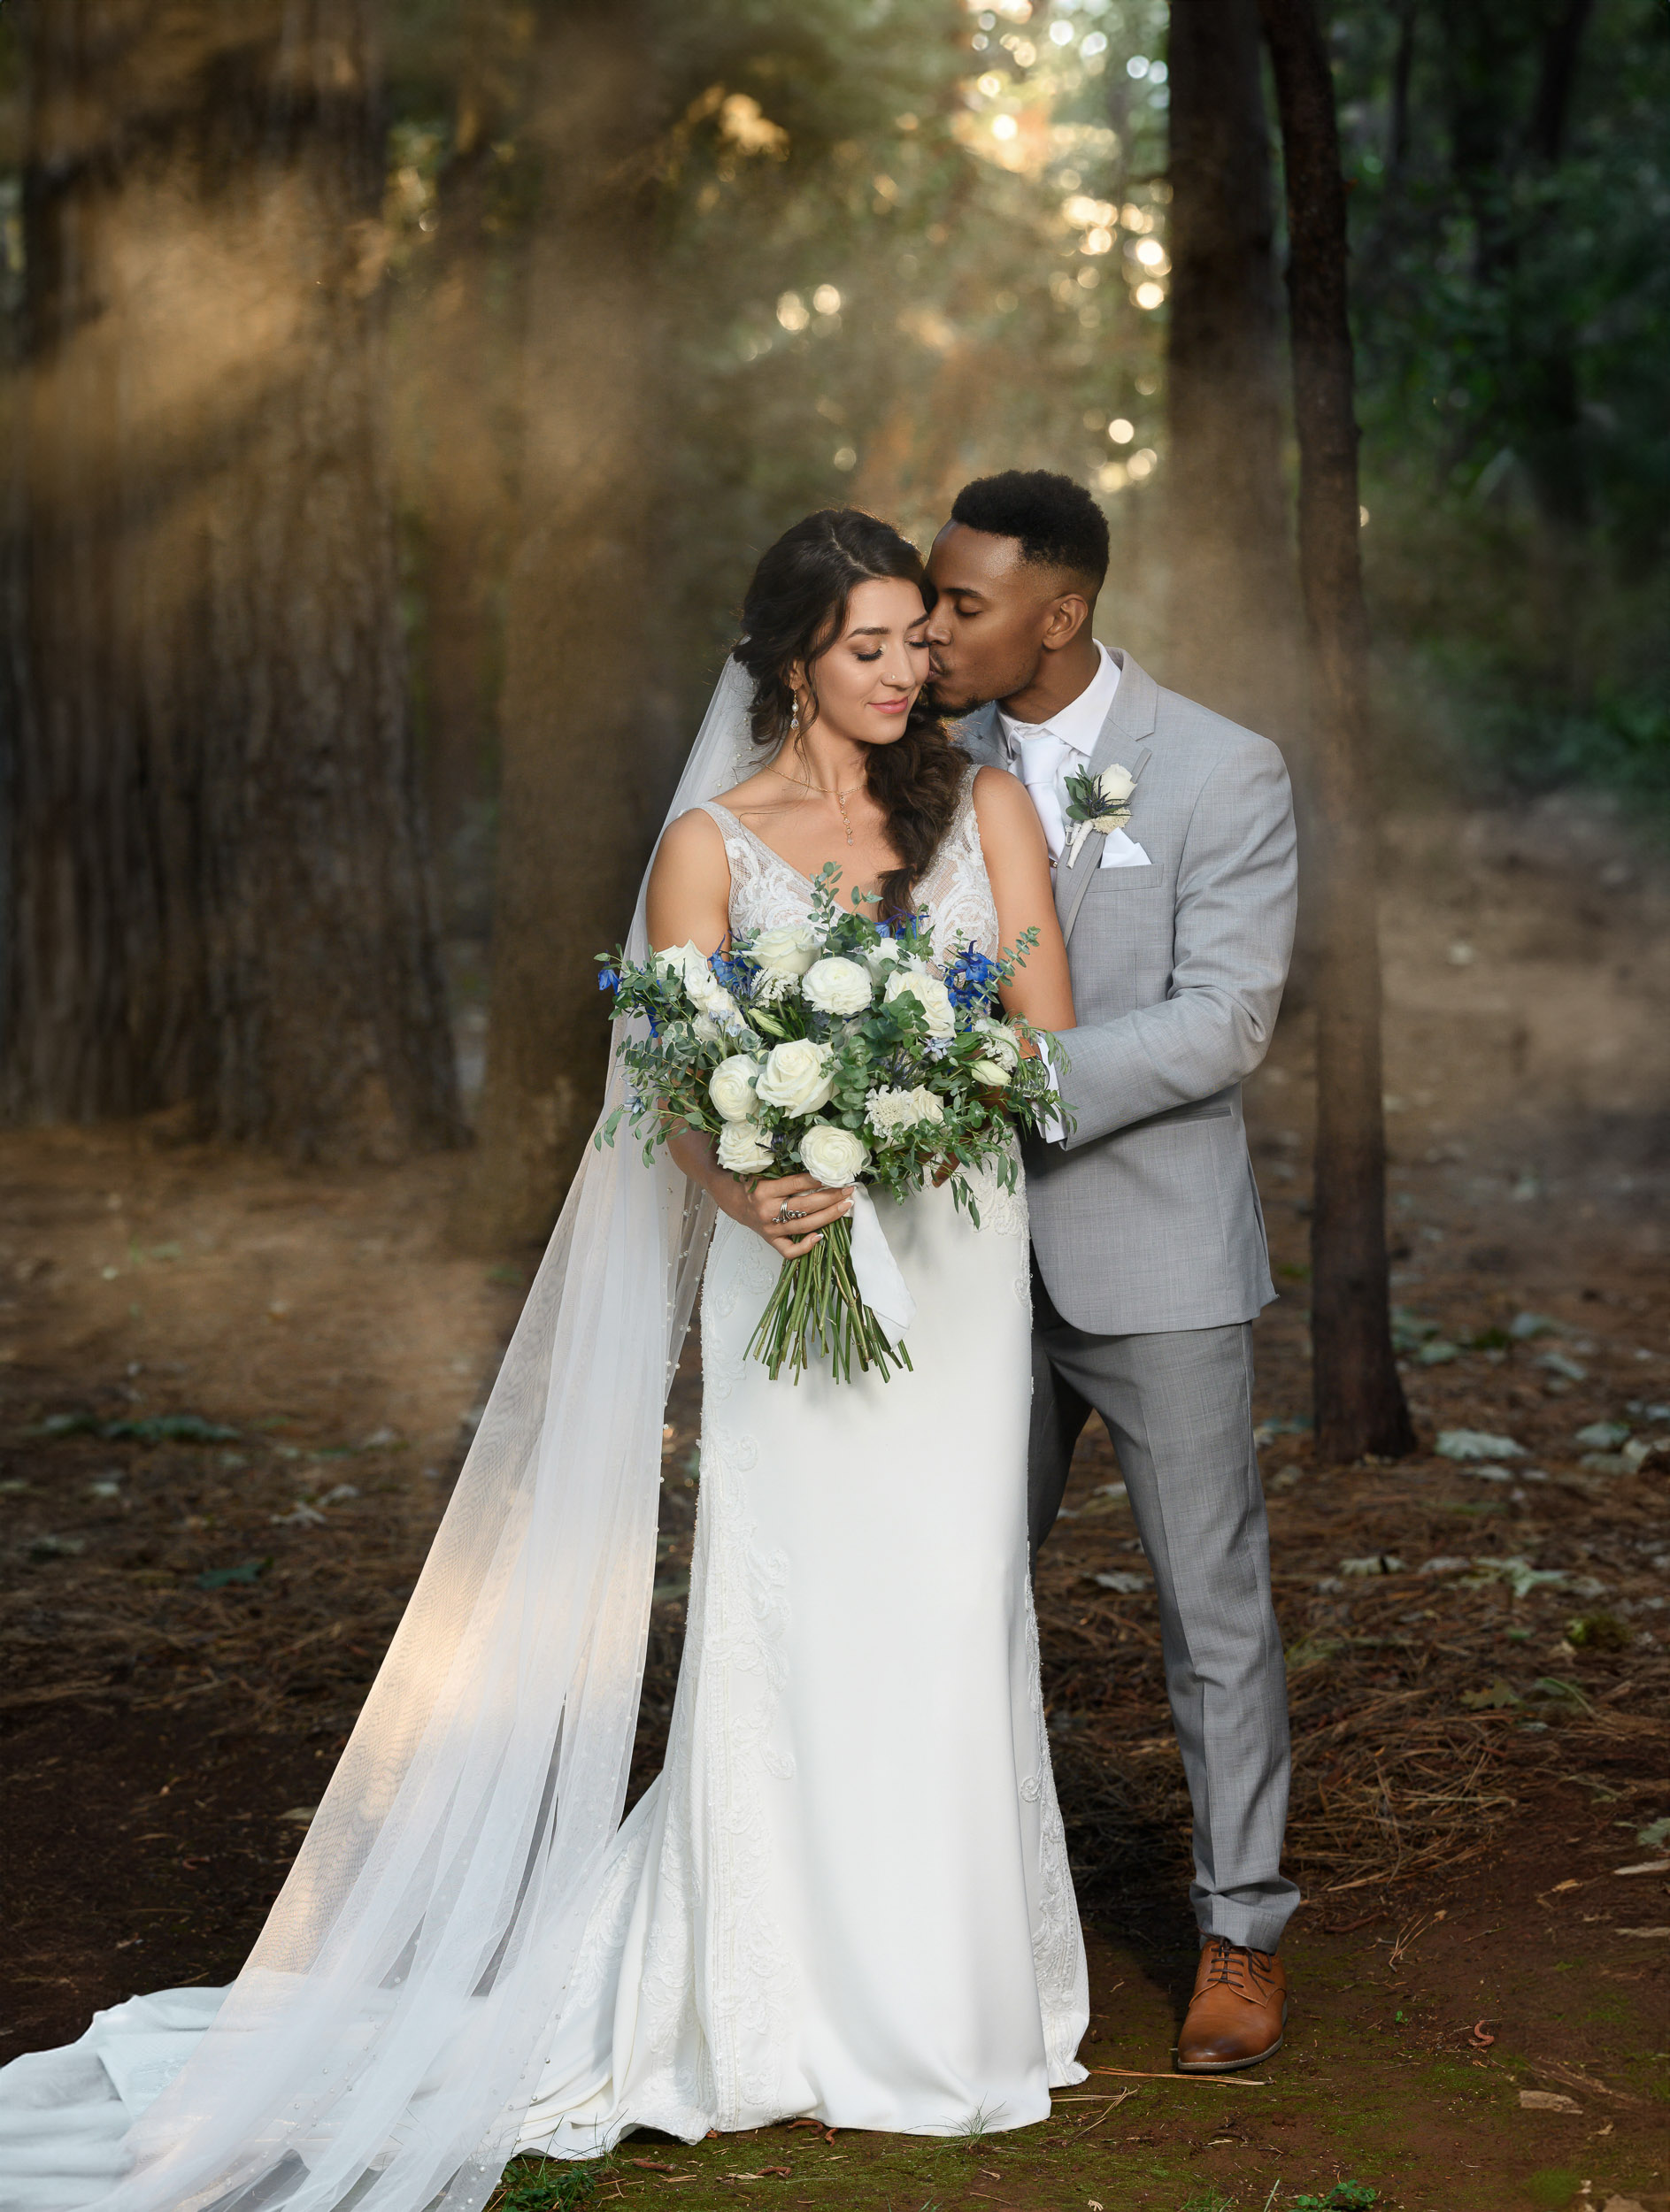 A bride and groom embracing in the woods.